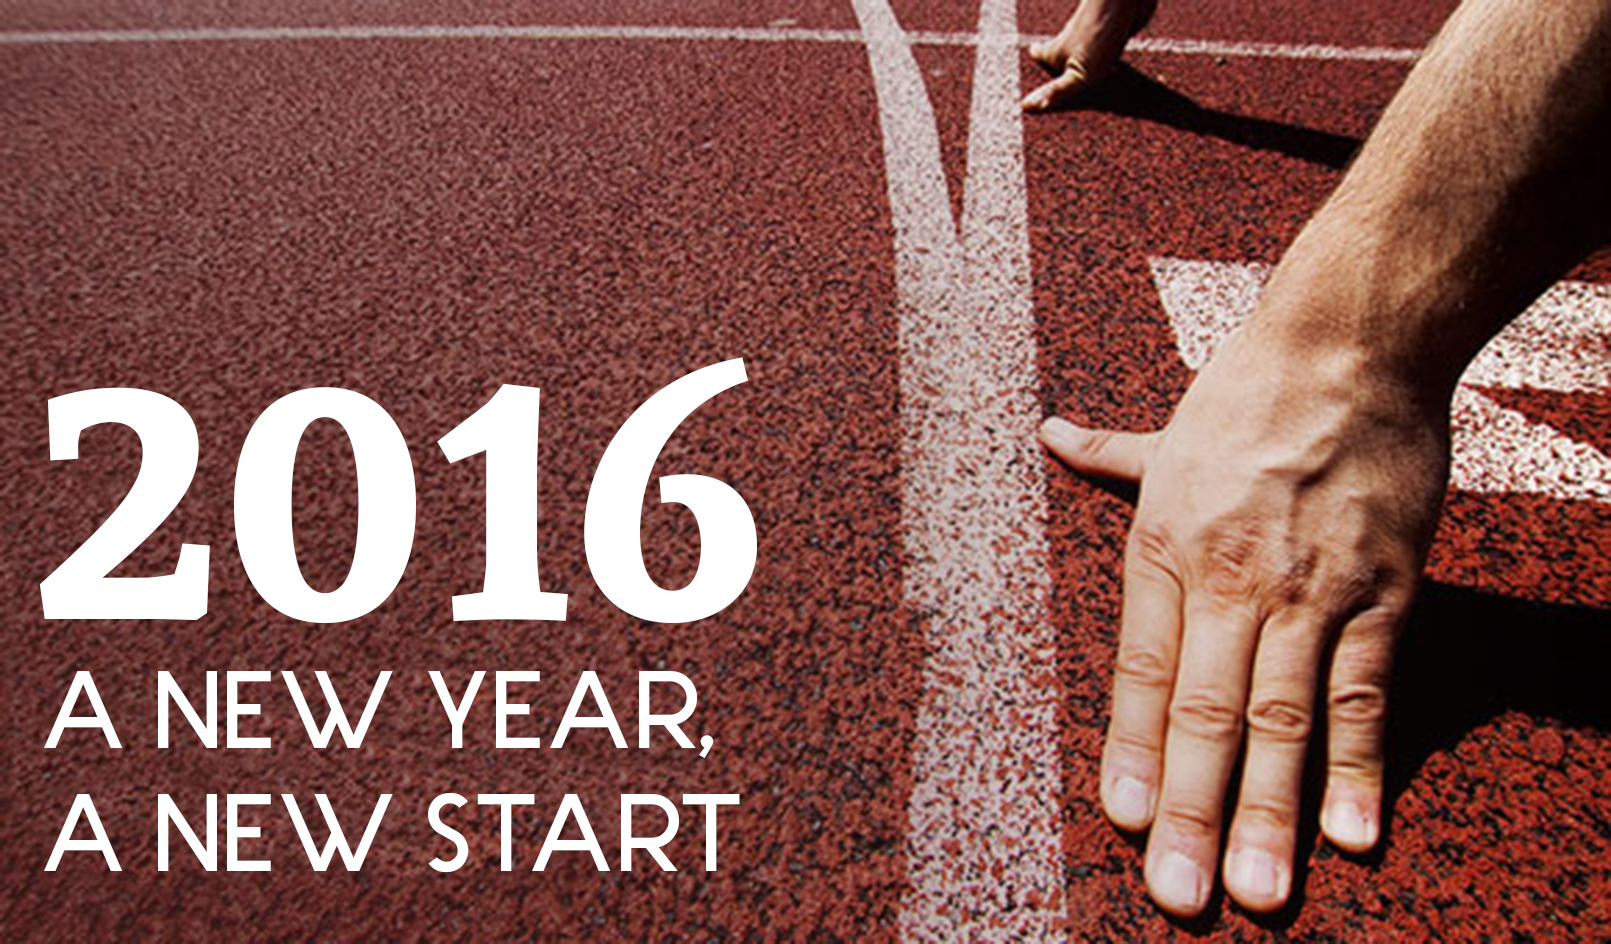 Be on track for 2016!